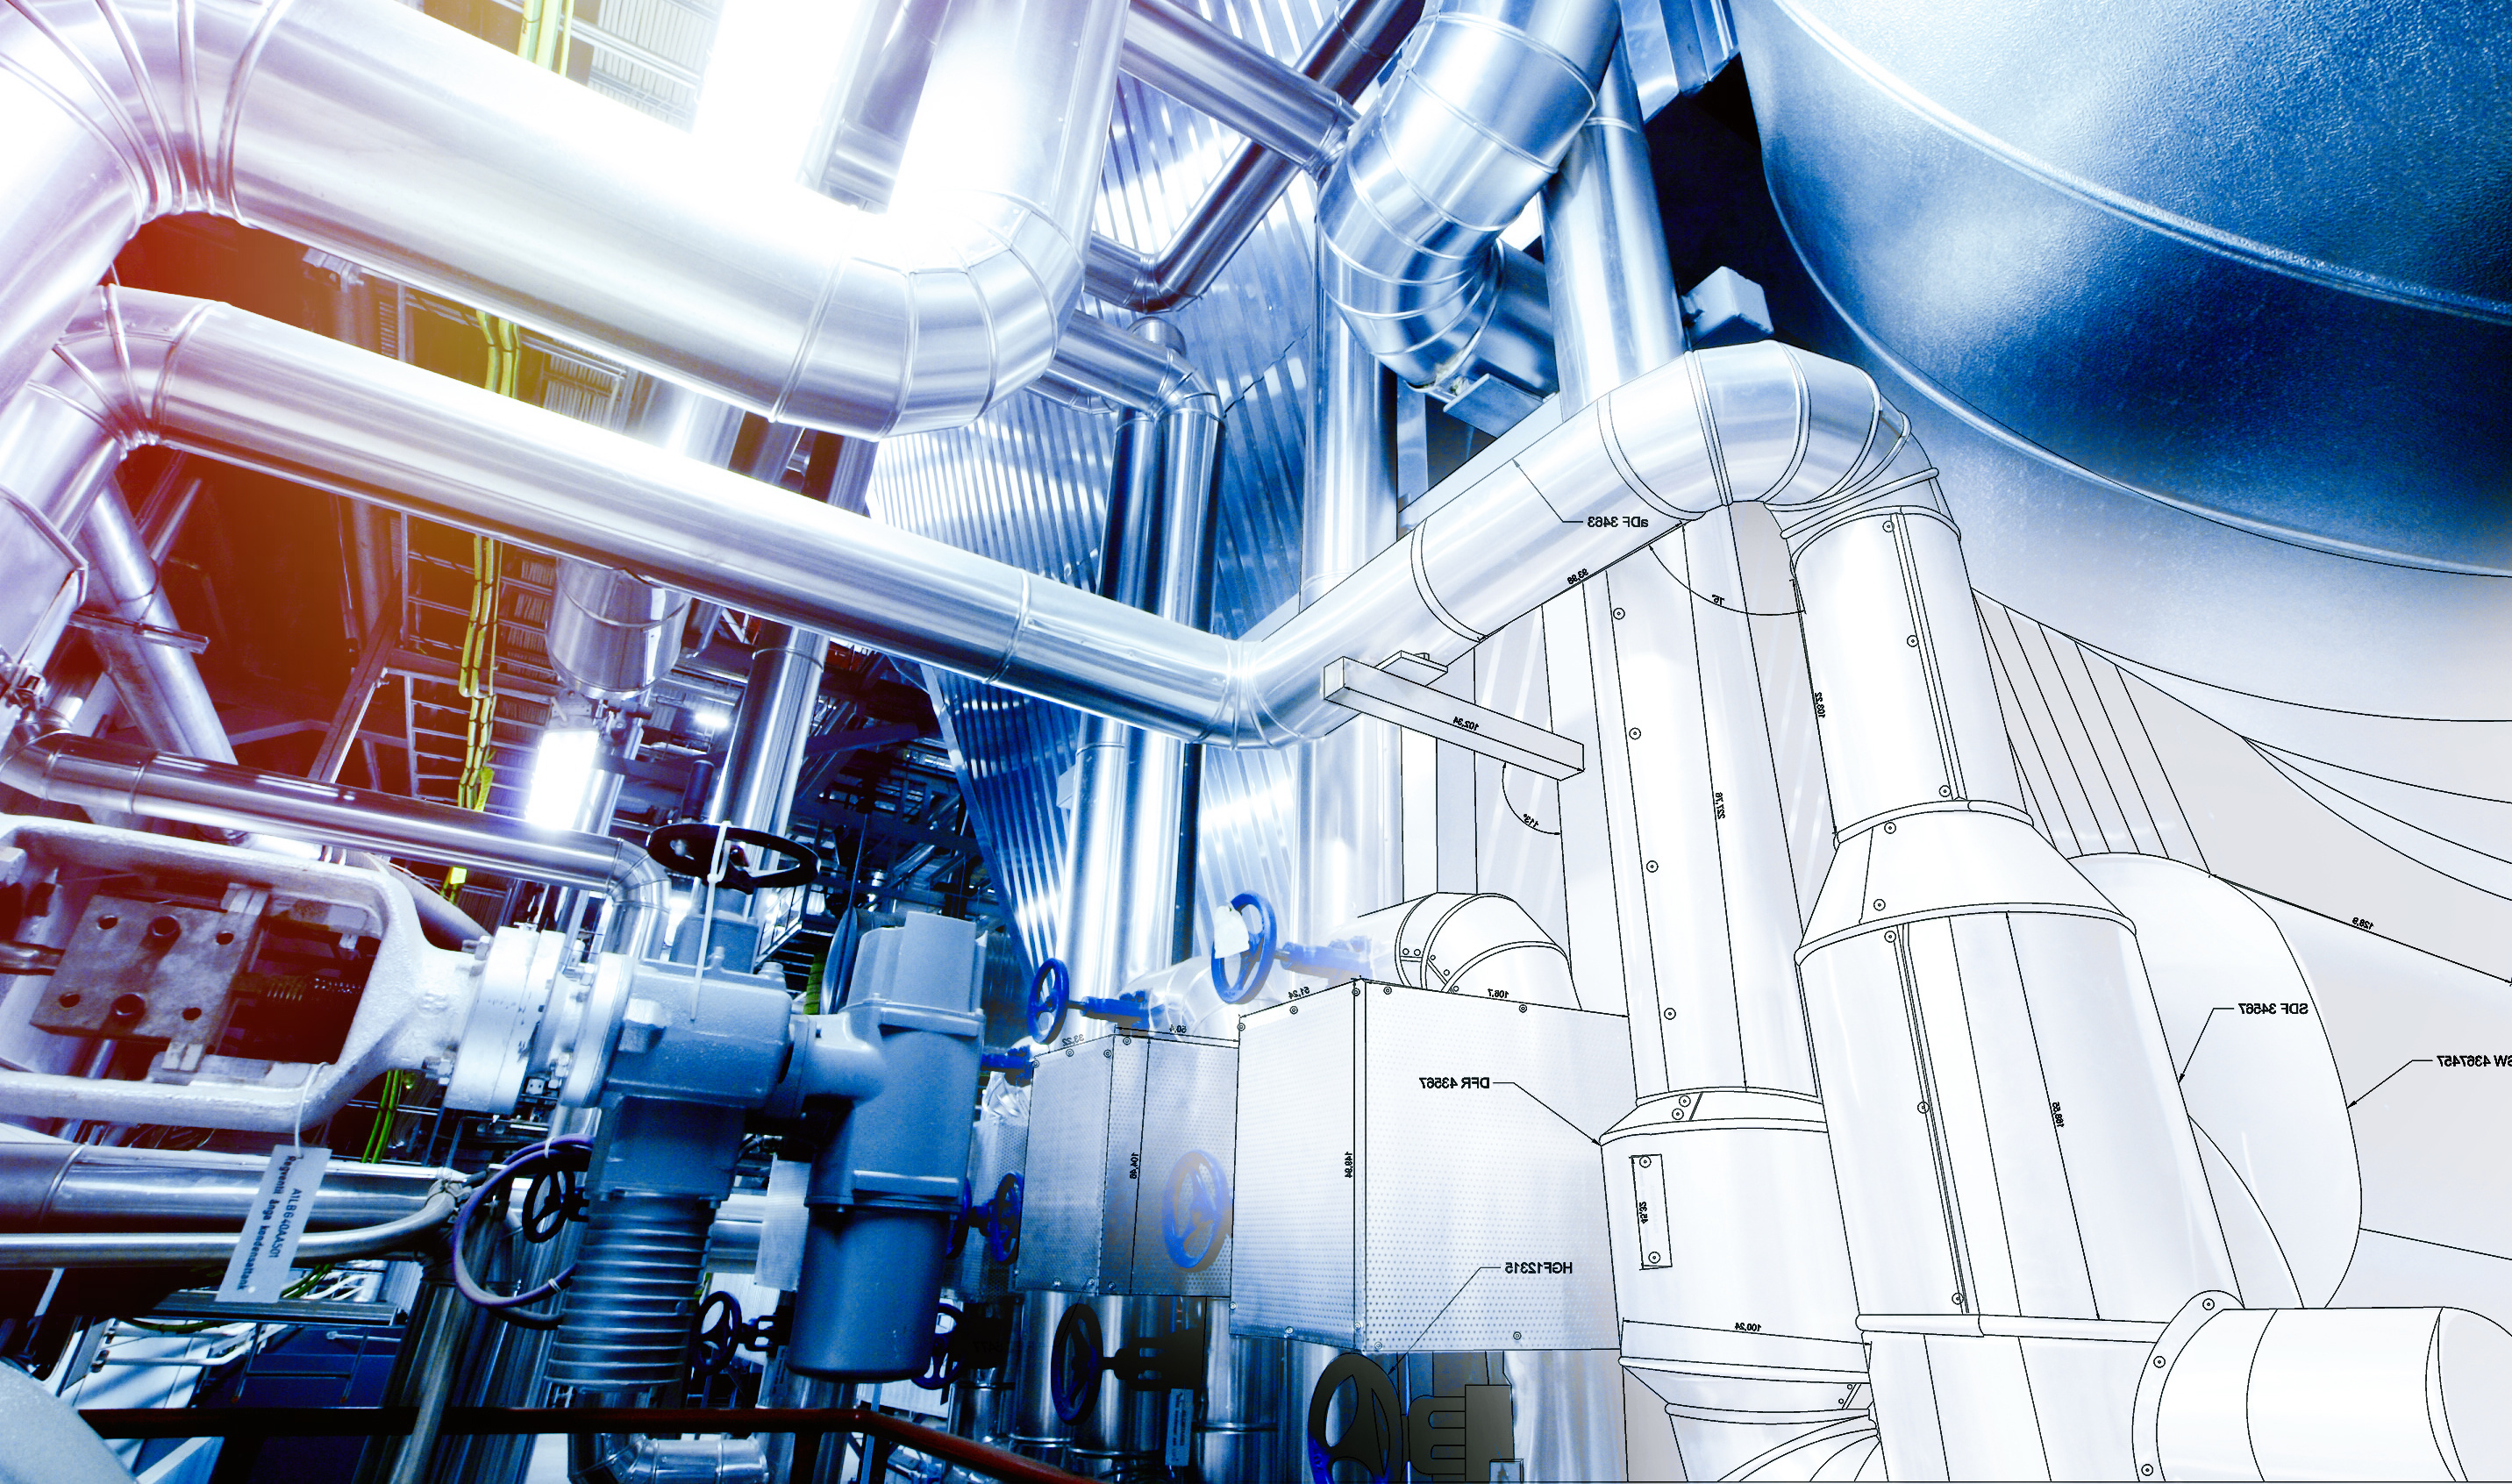 Reducing Noise Emissions in Piping Systems with DSHplus and HyperStudy